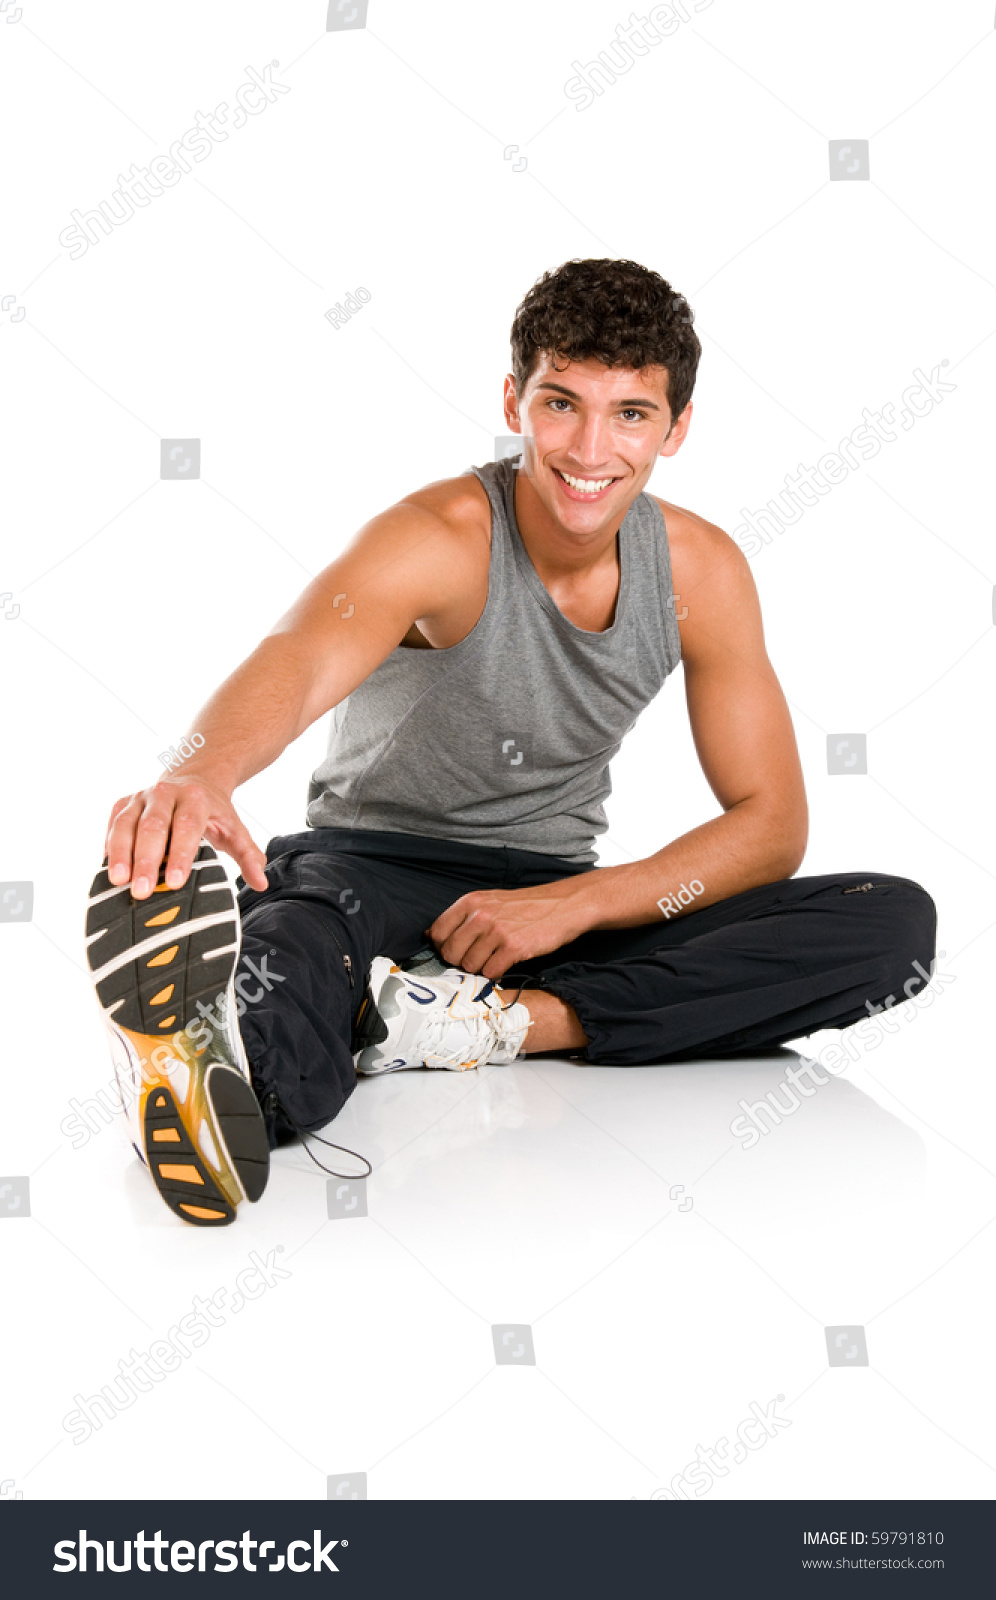 Happy smiling young fitness man sitting and making stretching exercises after gym isolated on white background #59791810